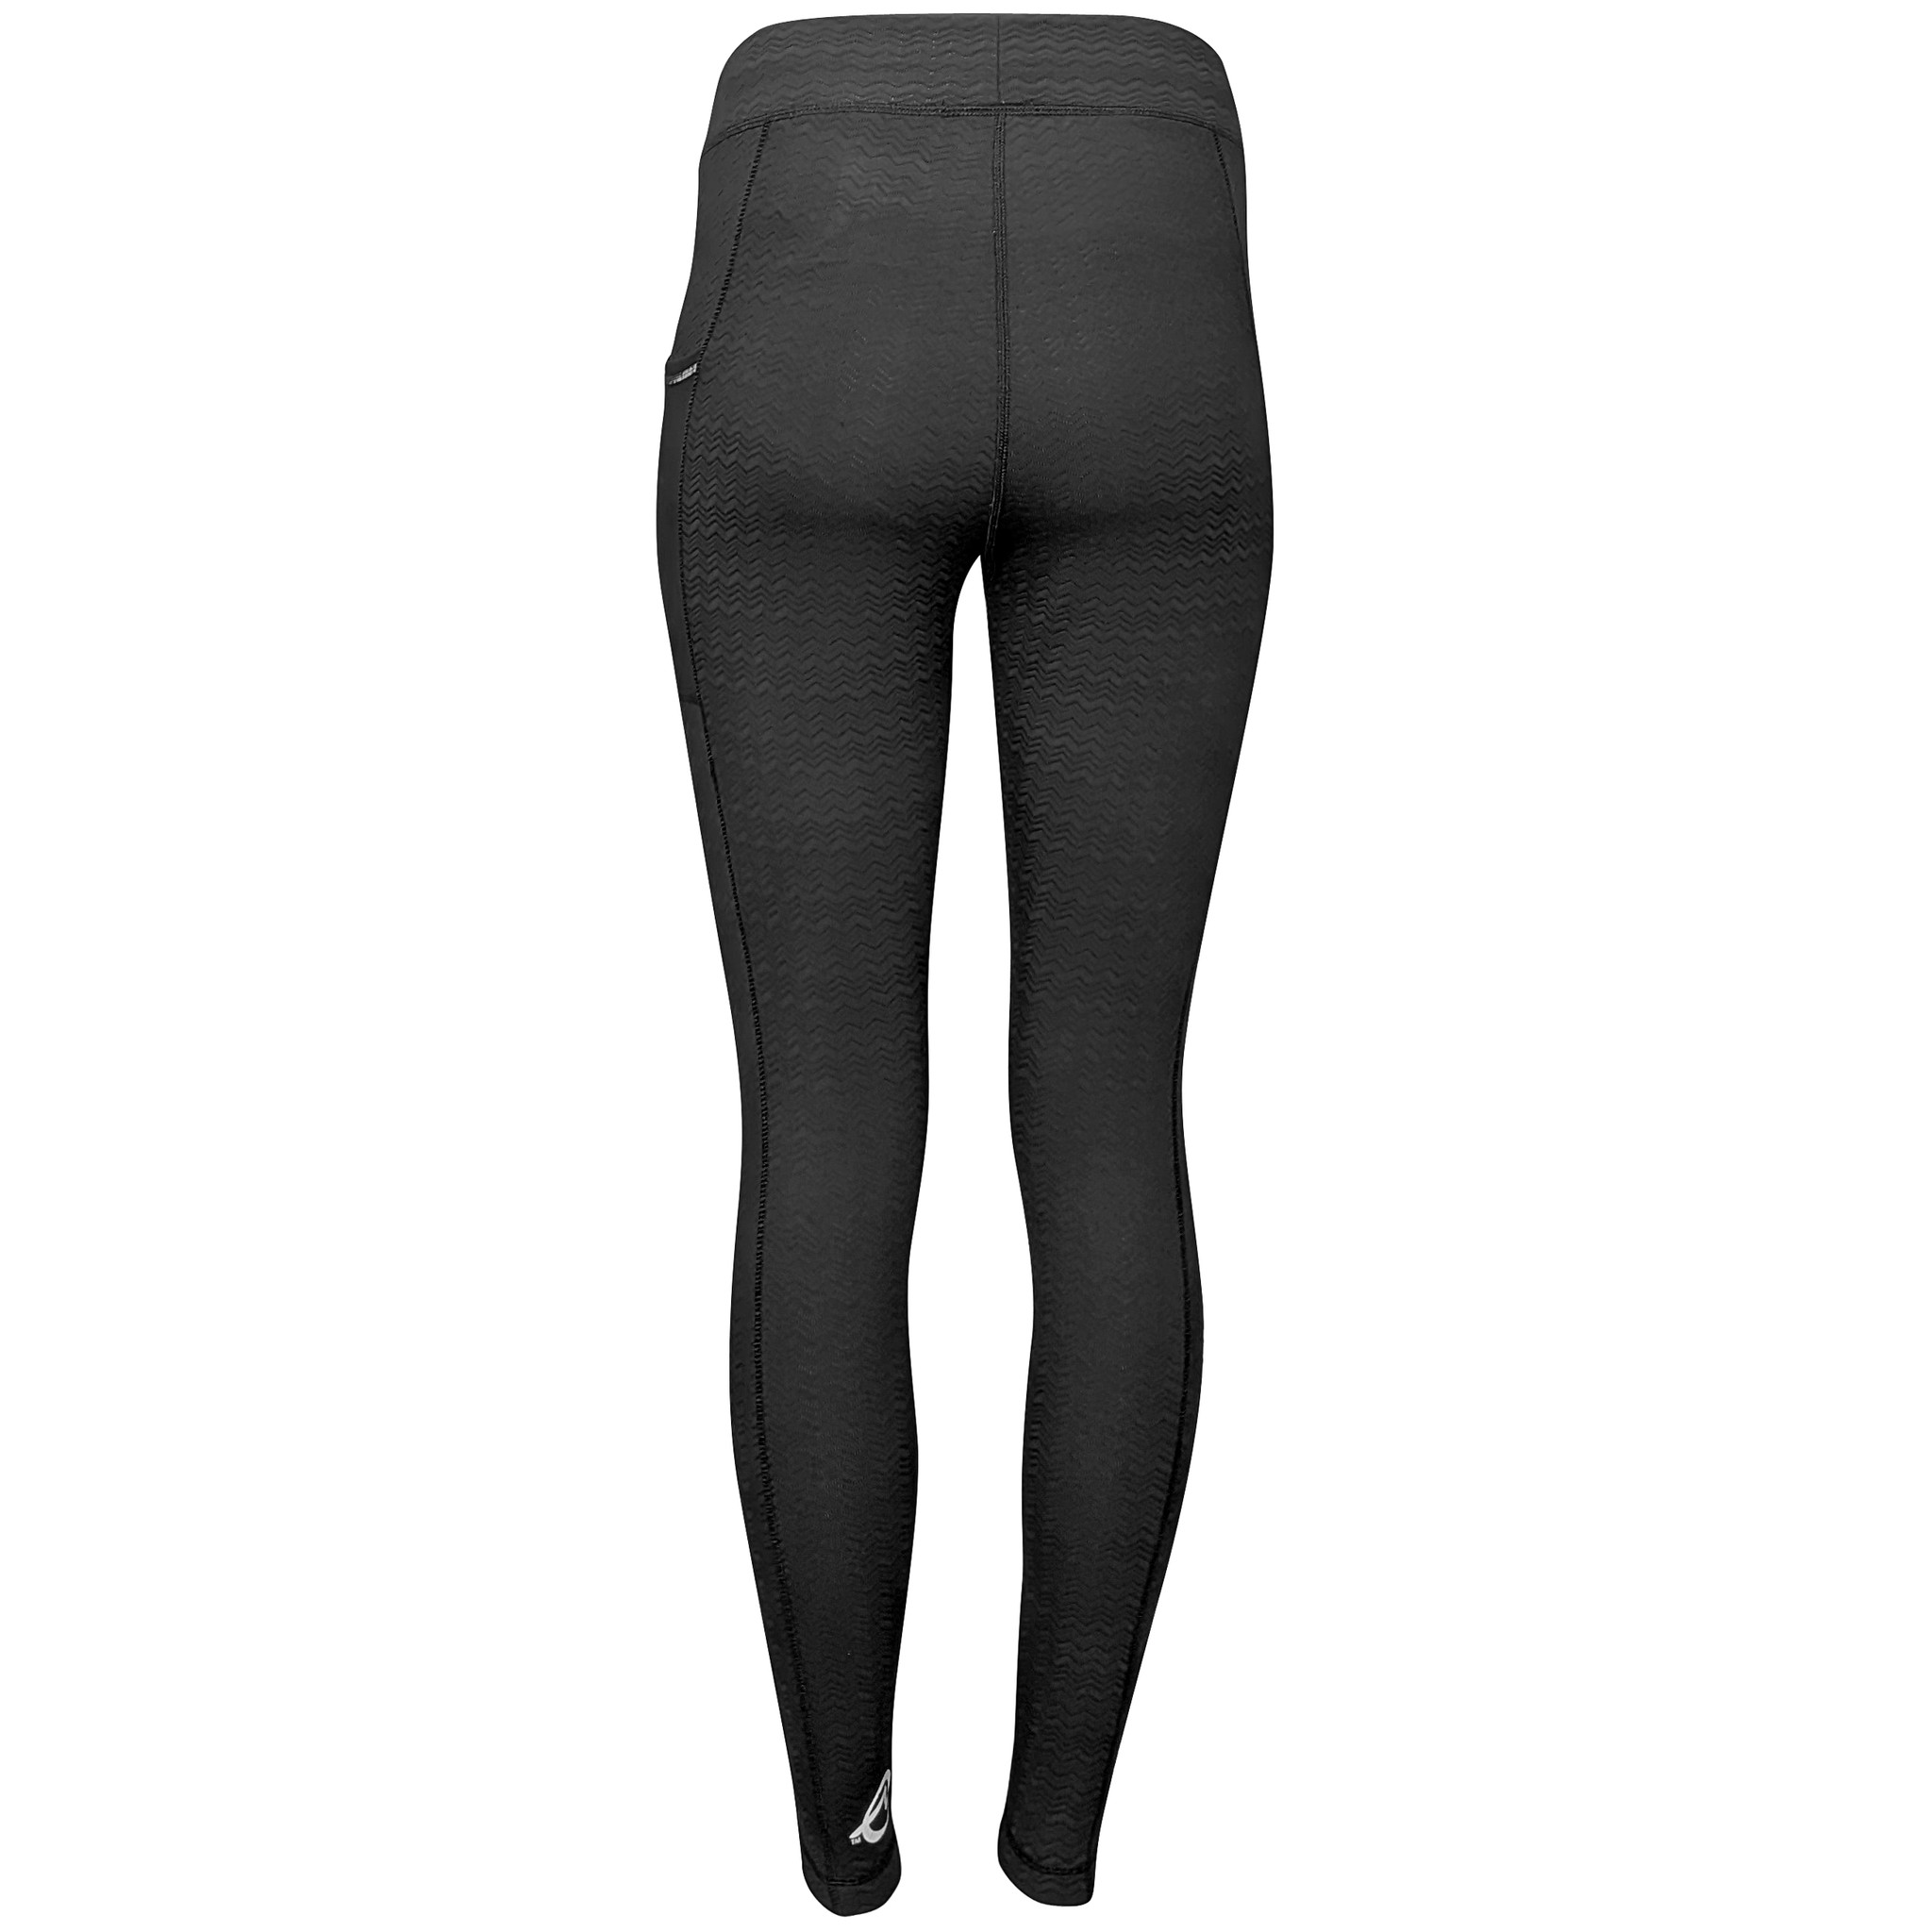  Ultimate Direction Women's Hydro Performance Running Tights  Leggings with Pockets, Water Bottles Inlcuded Onyx : Sports & Outdoors